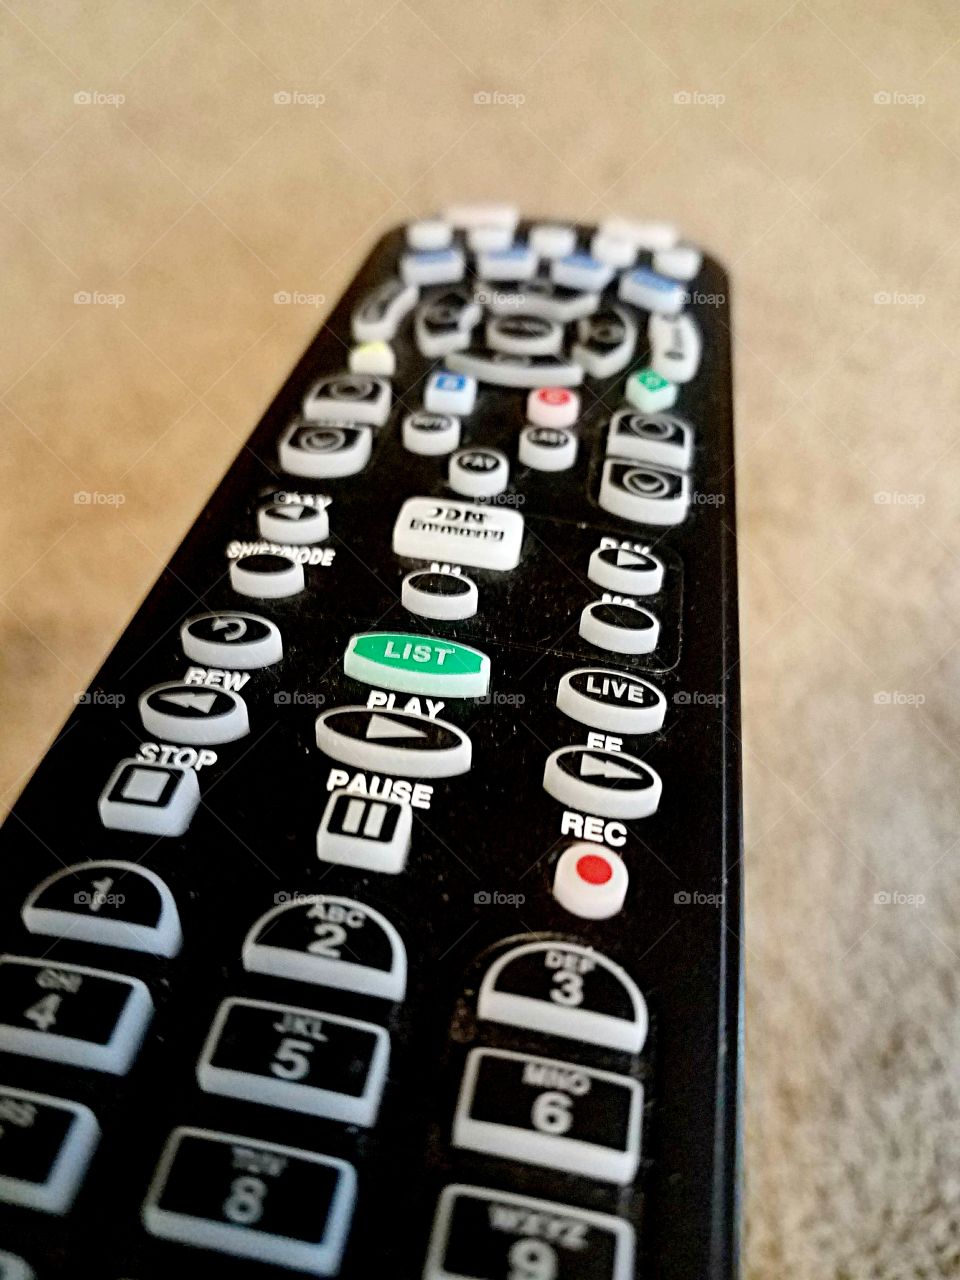 Remote control for the TV